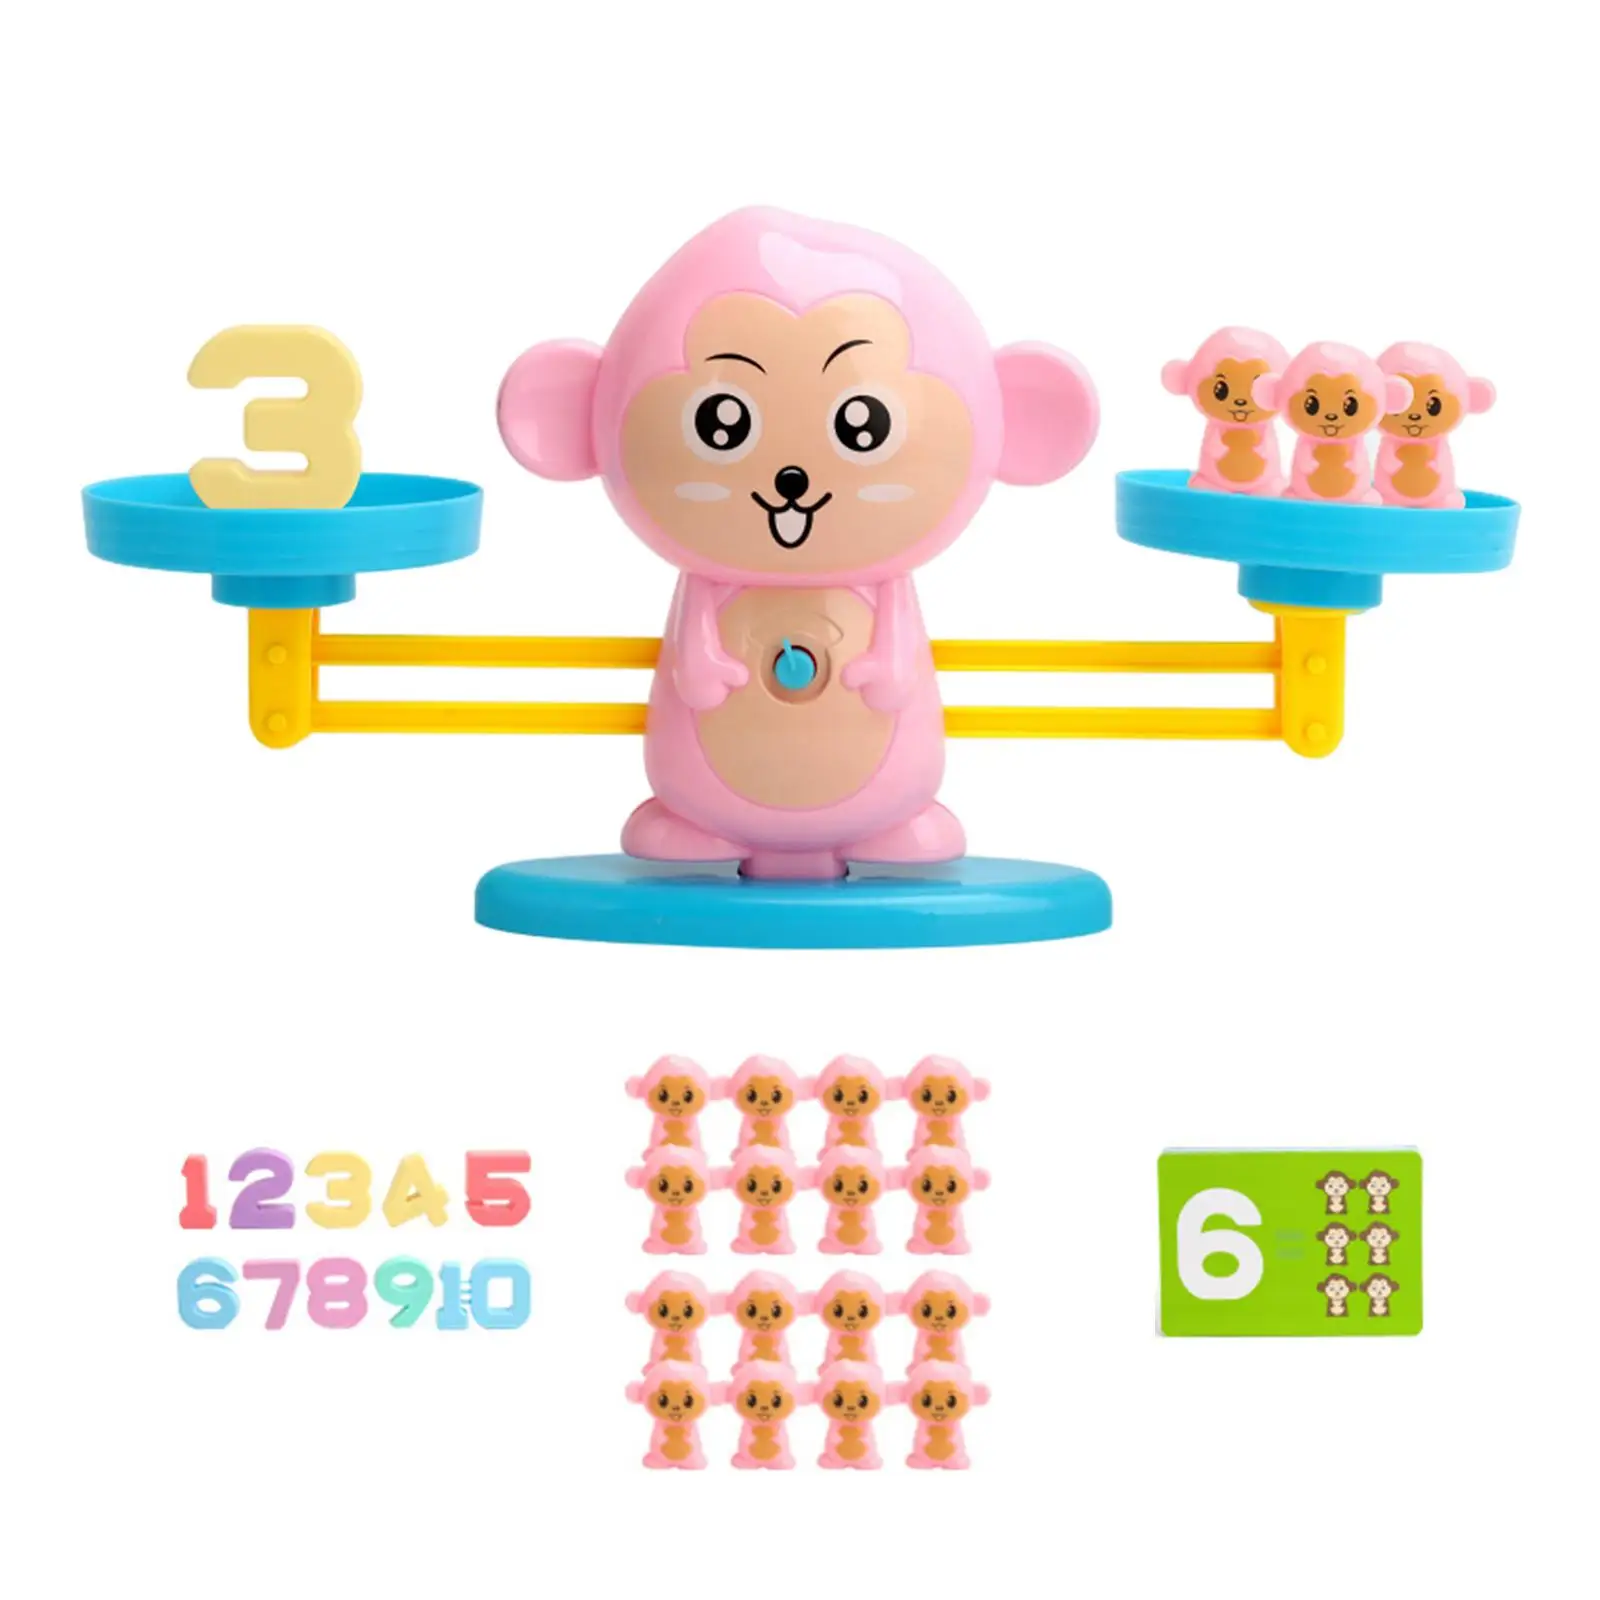 Educational Number Toy Counting Number Toy Balance Game toy Boy Girl